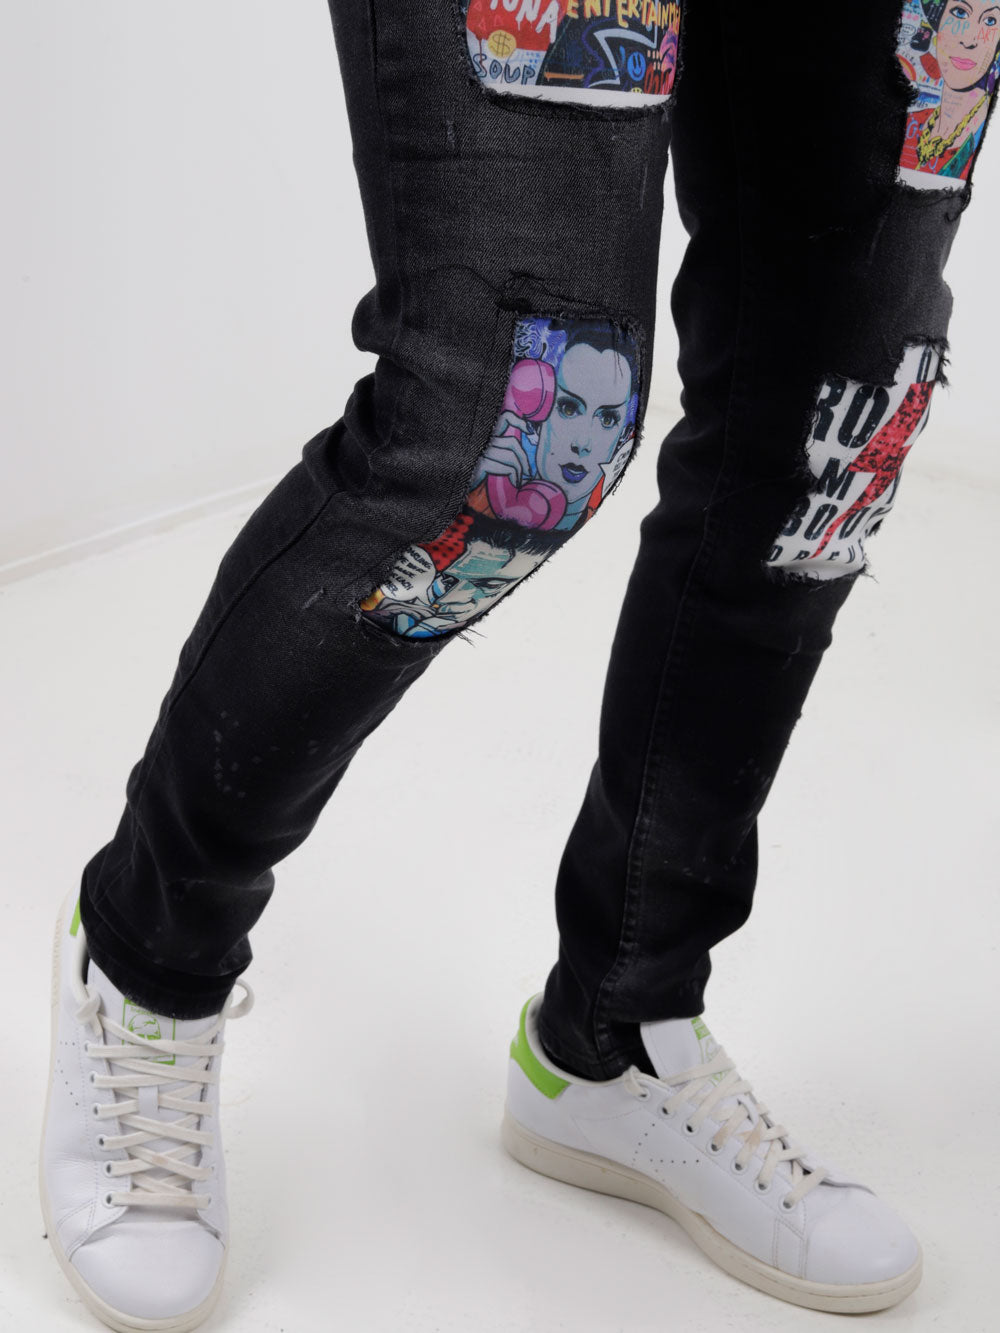 A man wearing a pair of MOONLISA jeans with patches on them.